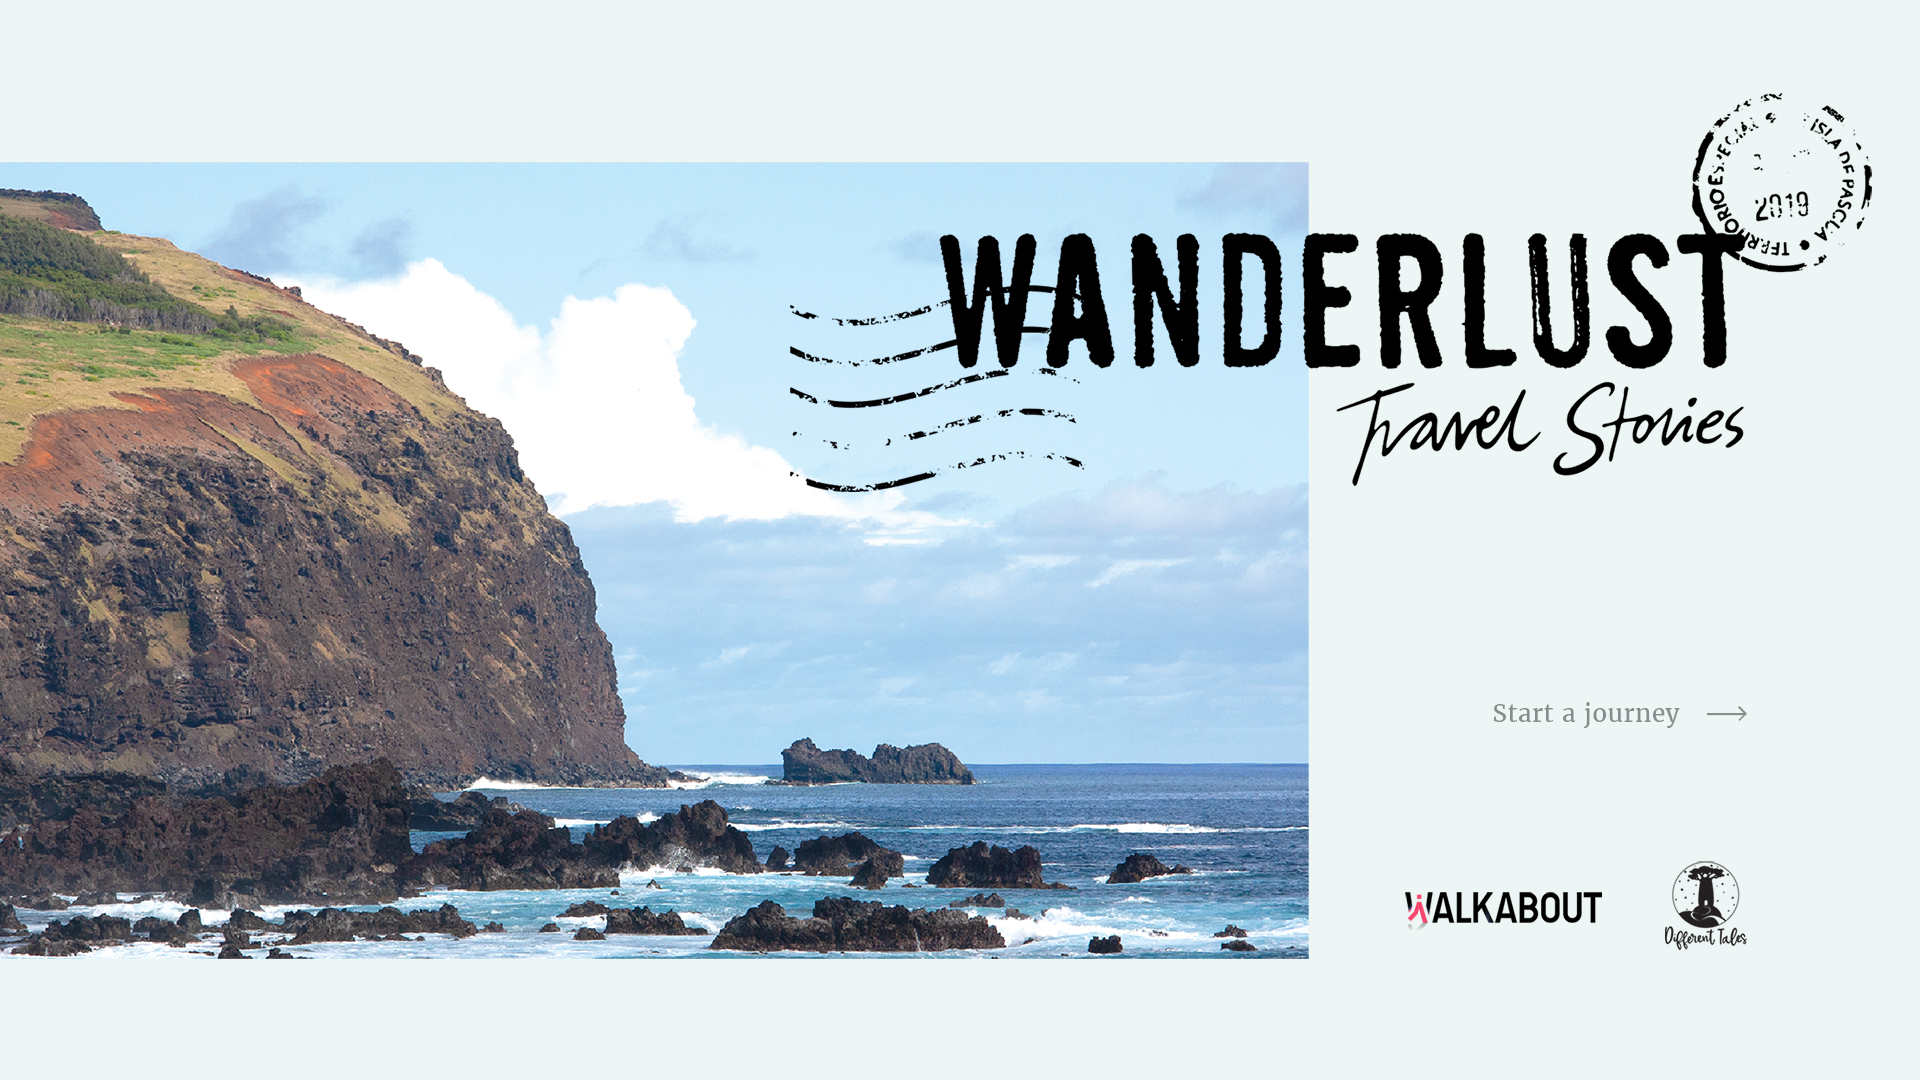 Wanderlust: Travel Stories Today! Explore the world from your desk!